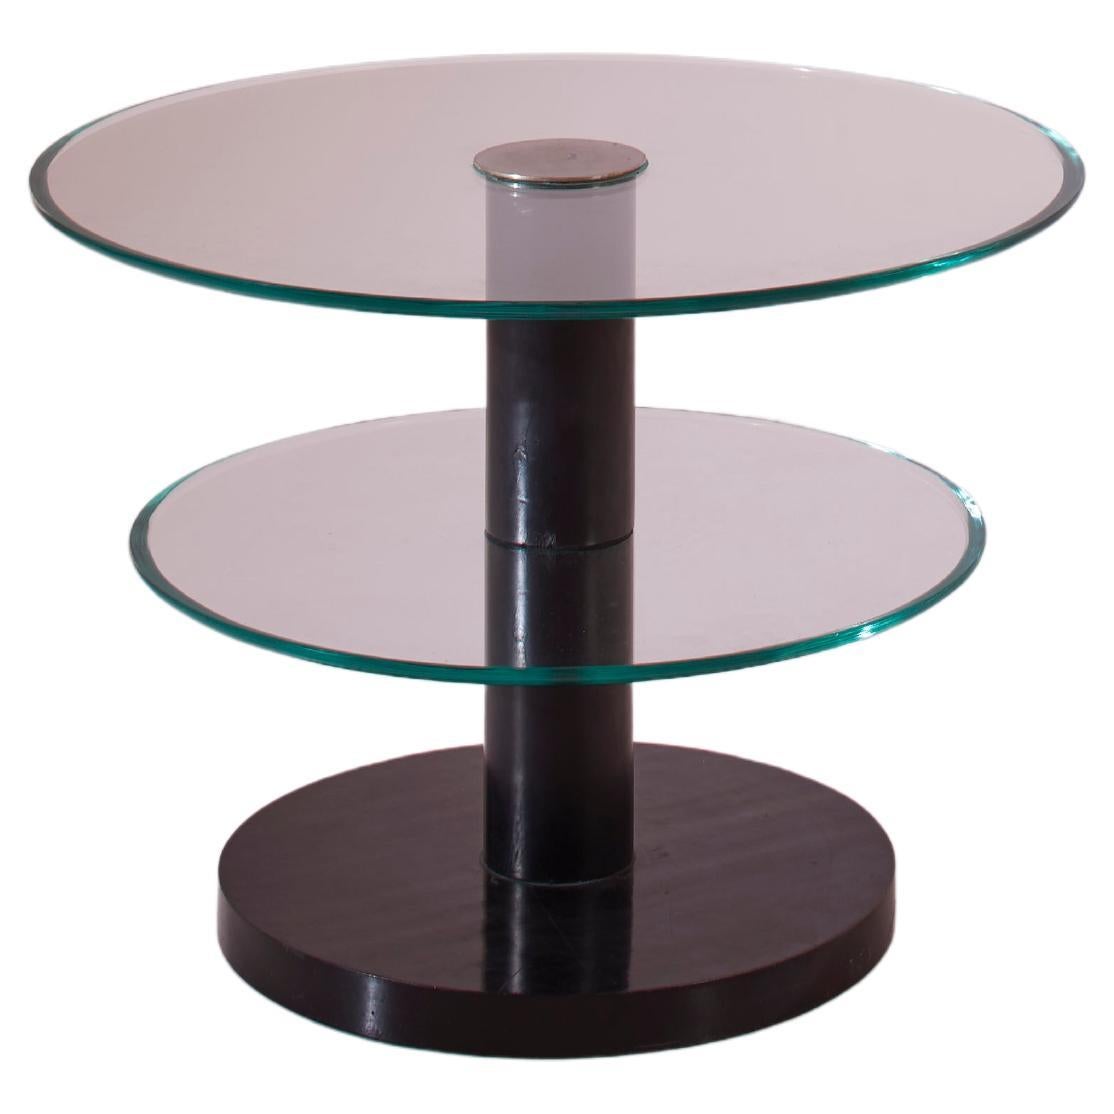 Gio Ponti wooden and glass occasional table, Italy, 1930s